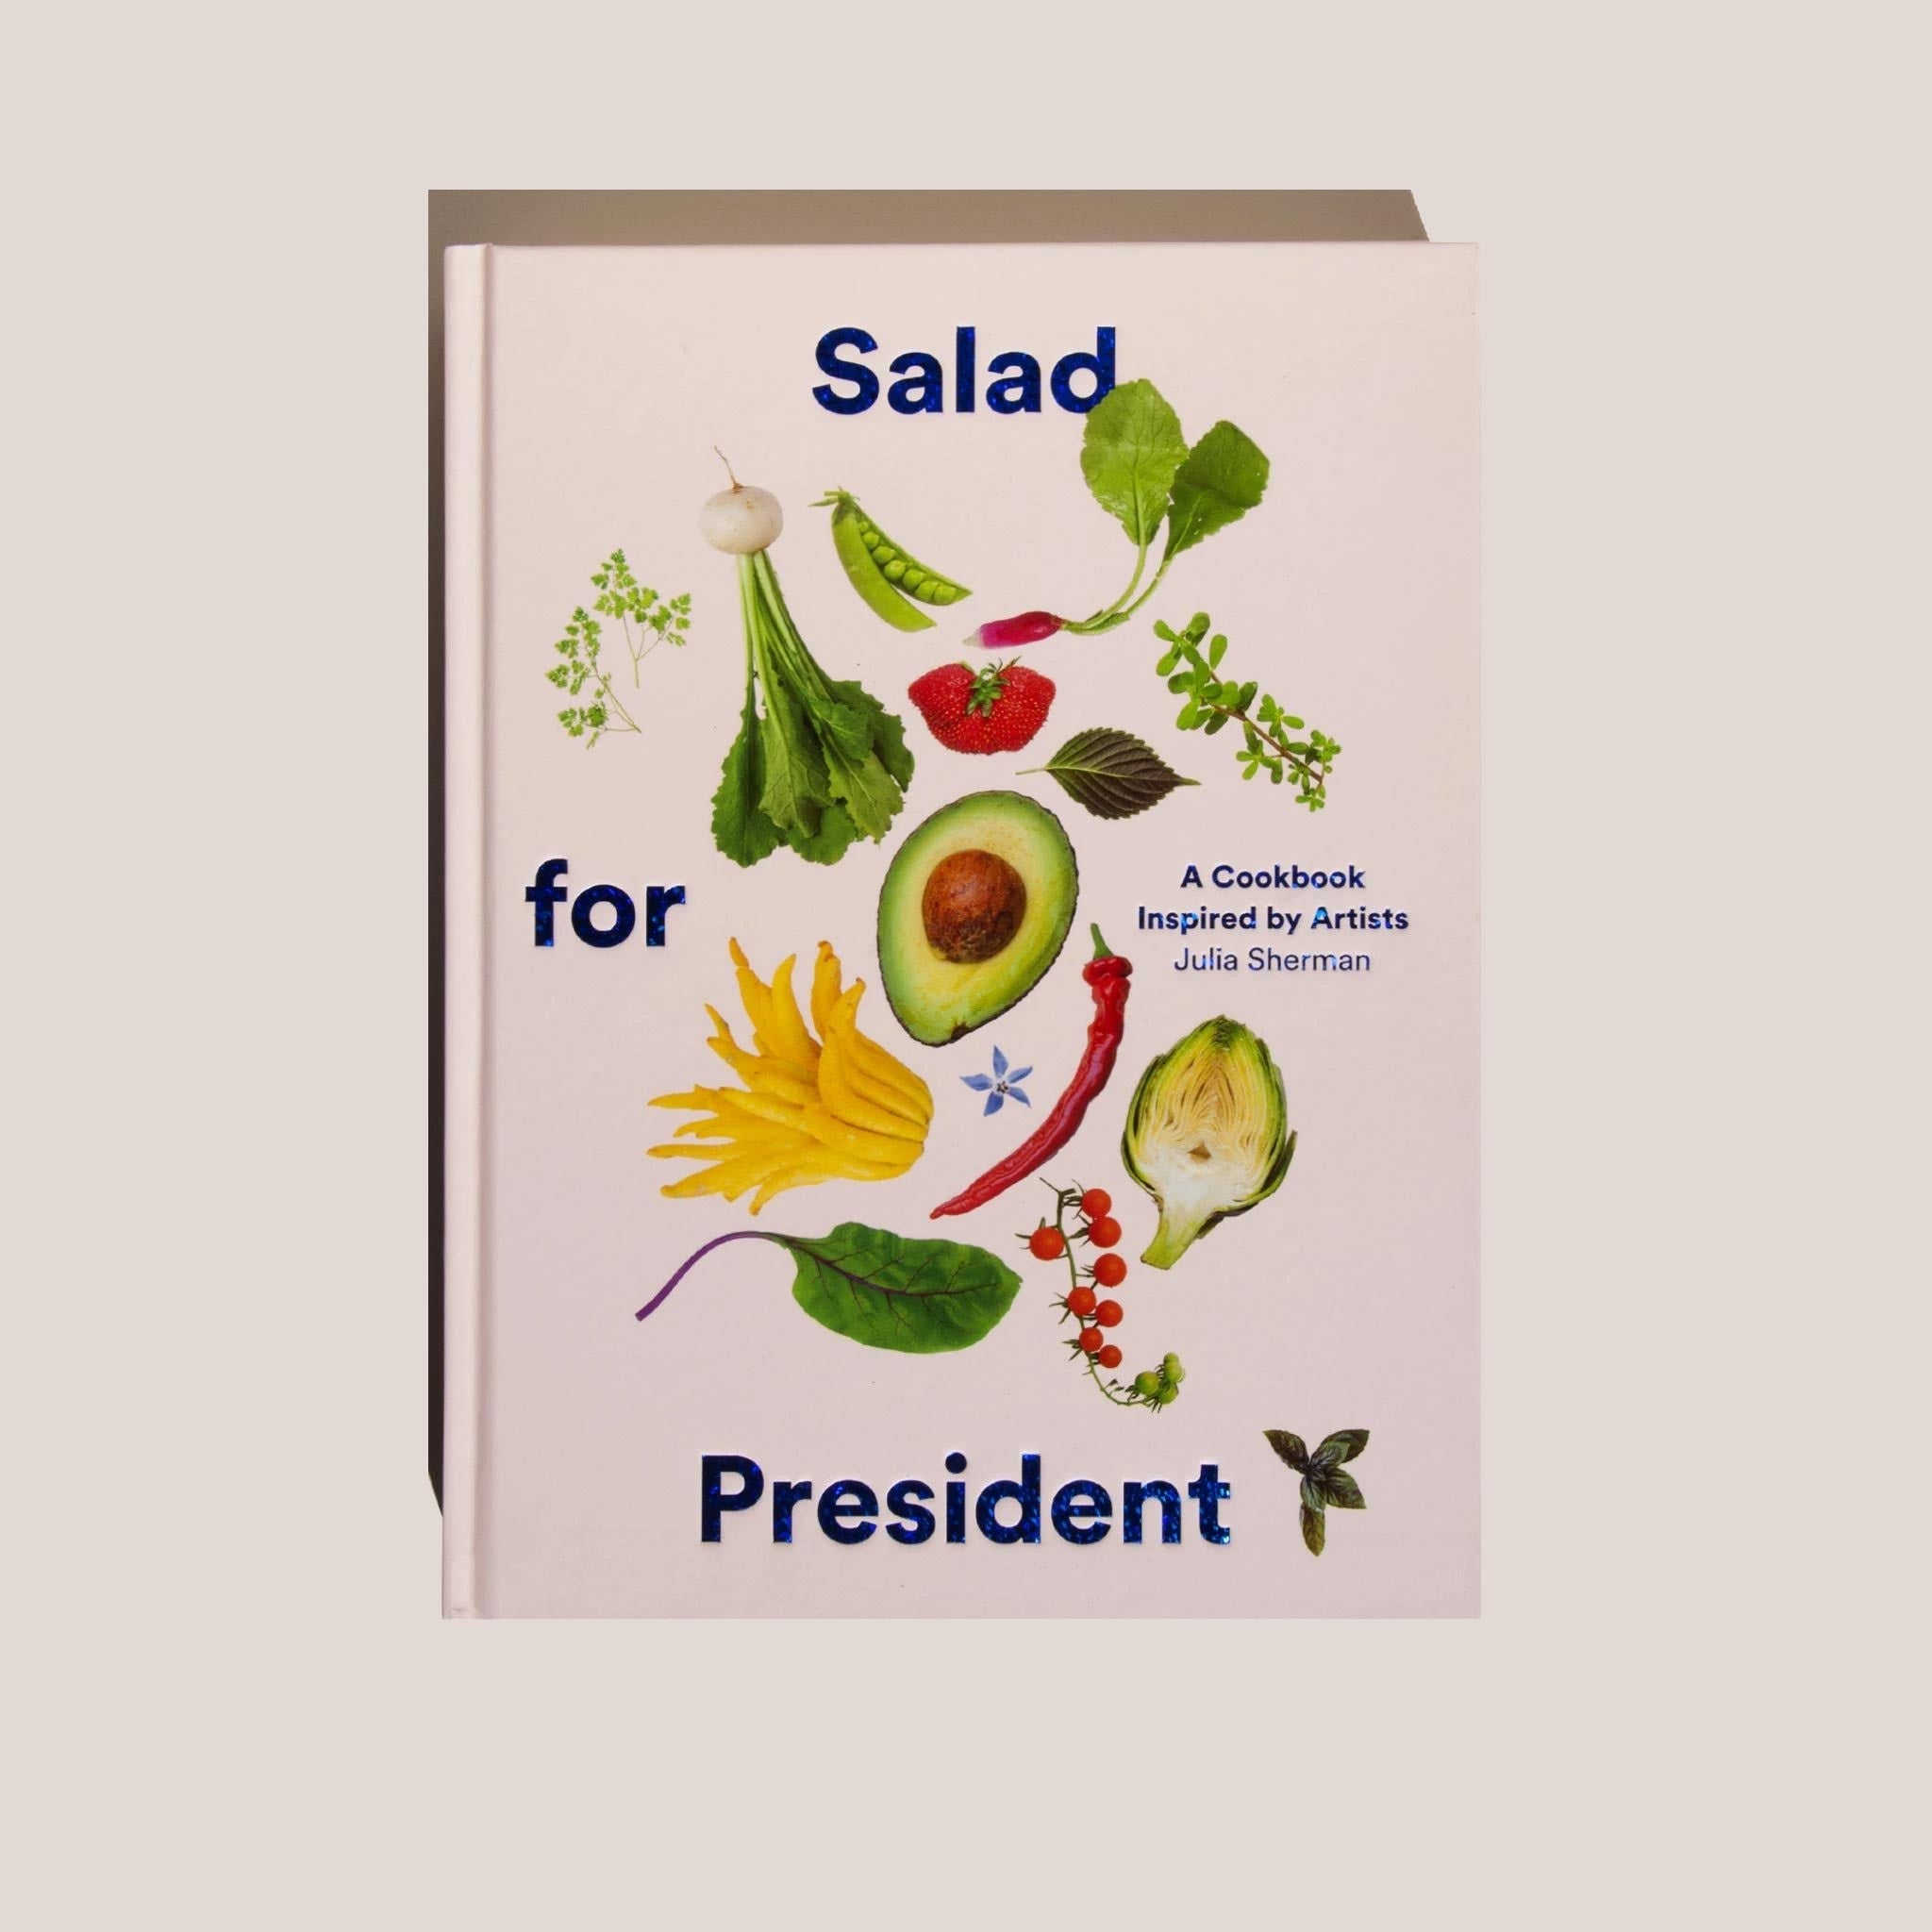 Salad for President by Julia Sherman, front cover, available at LCD.